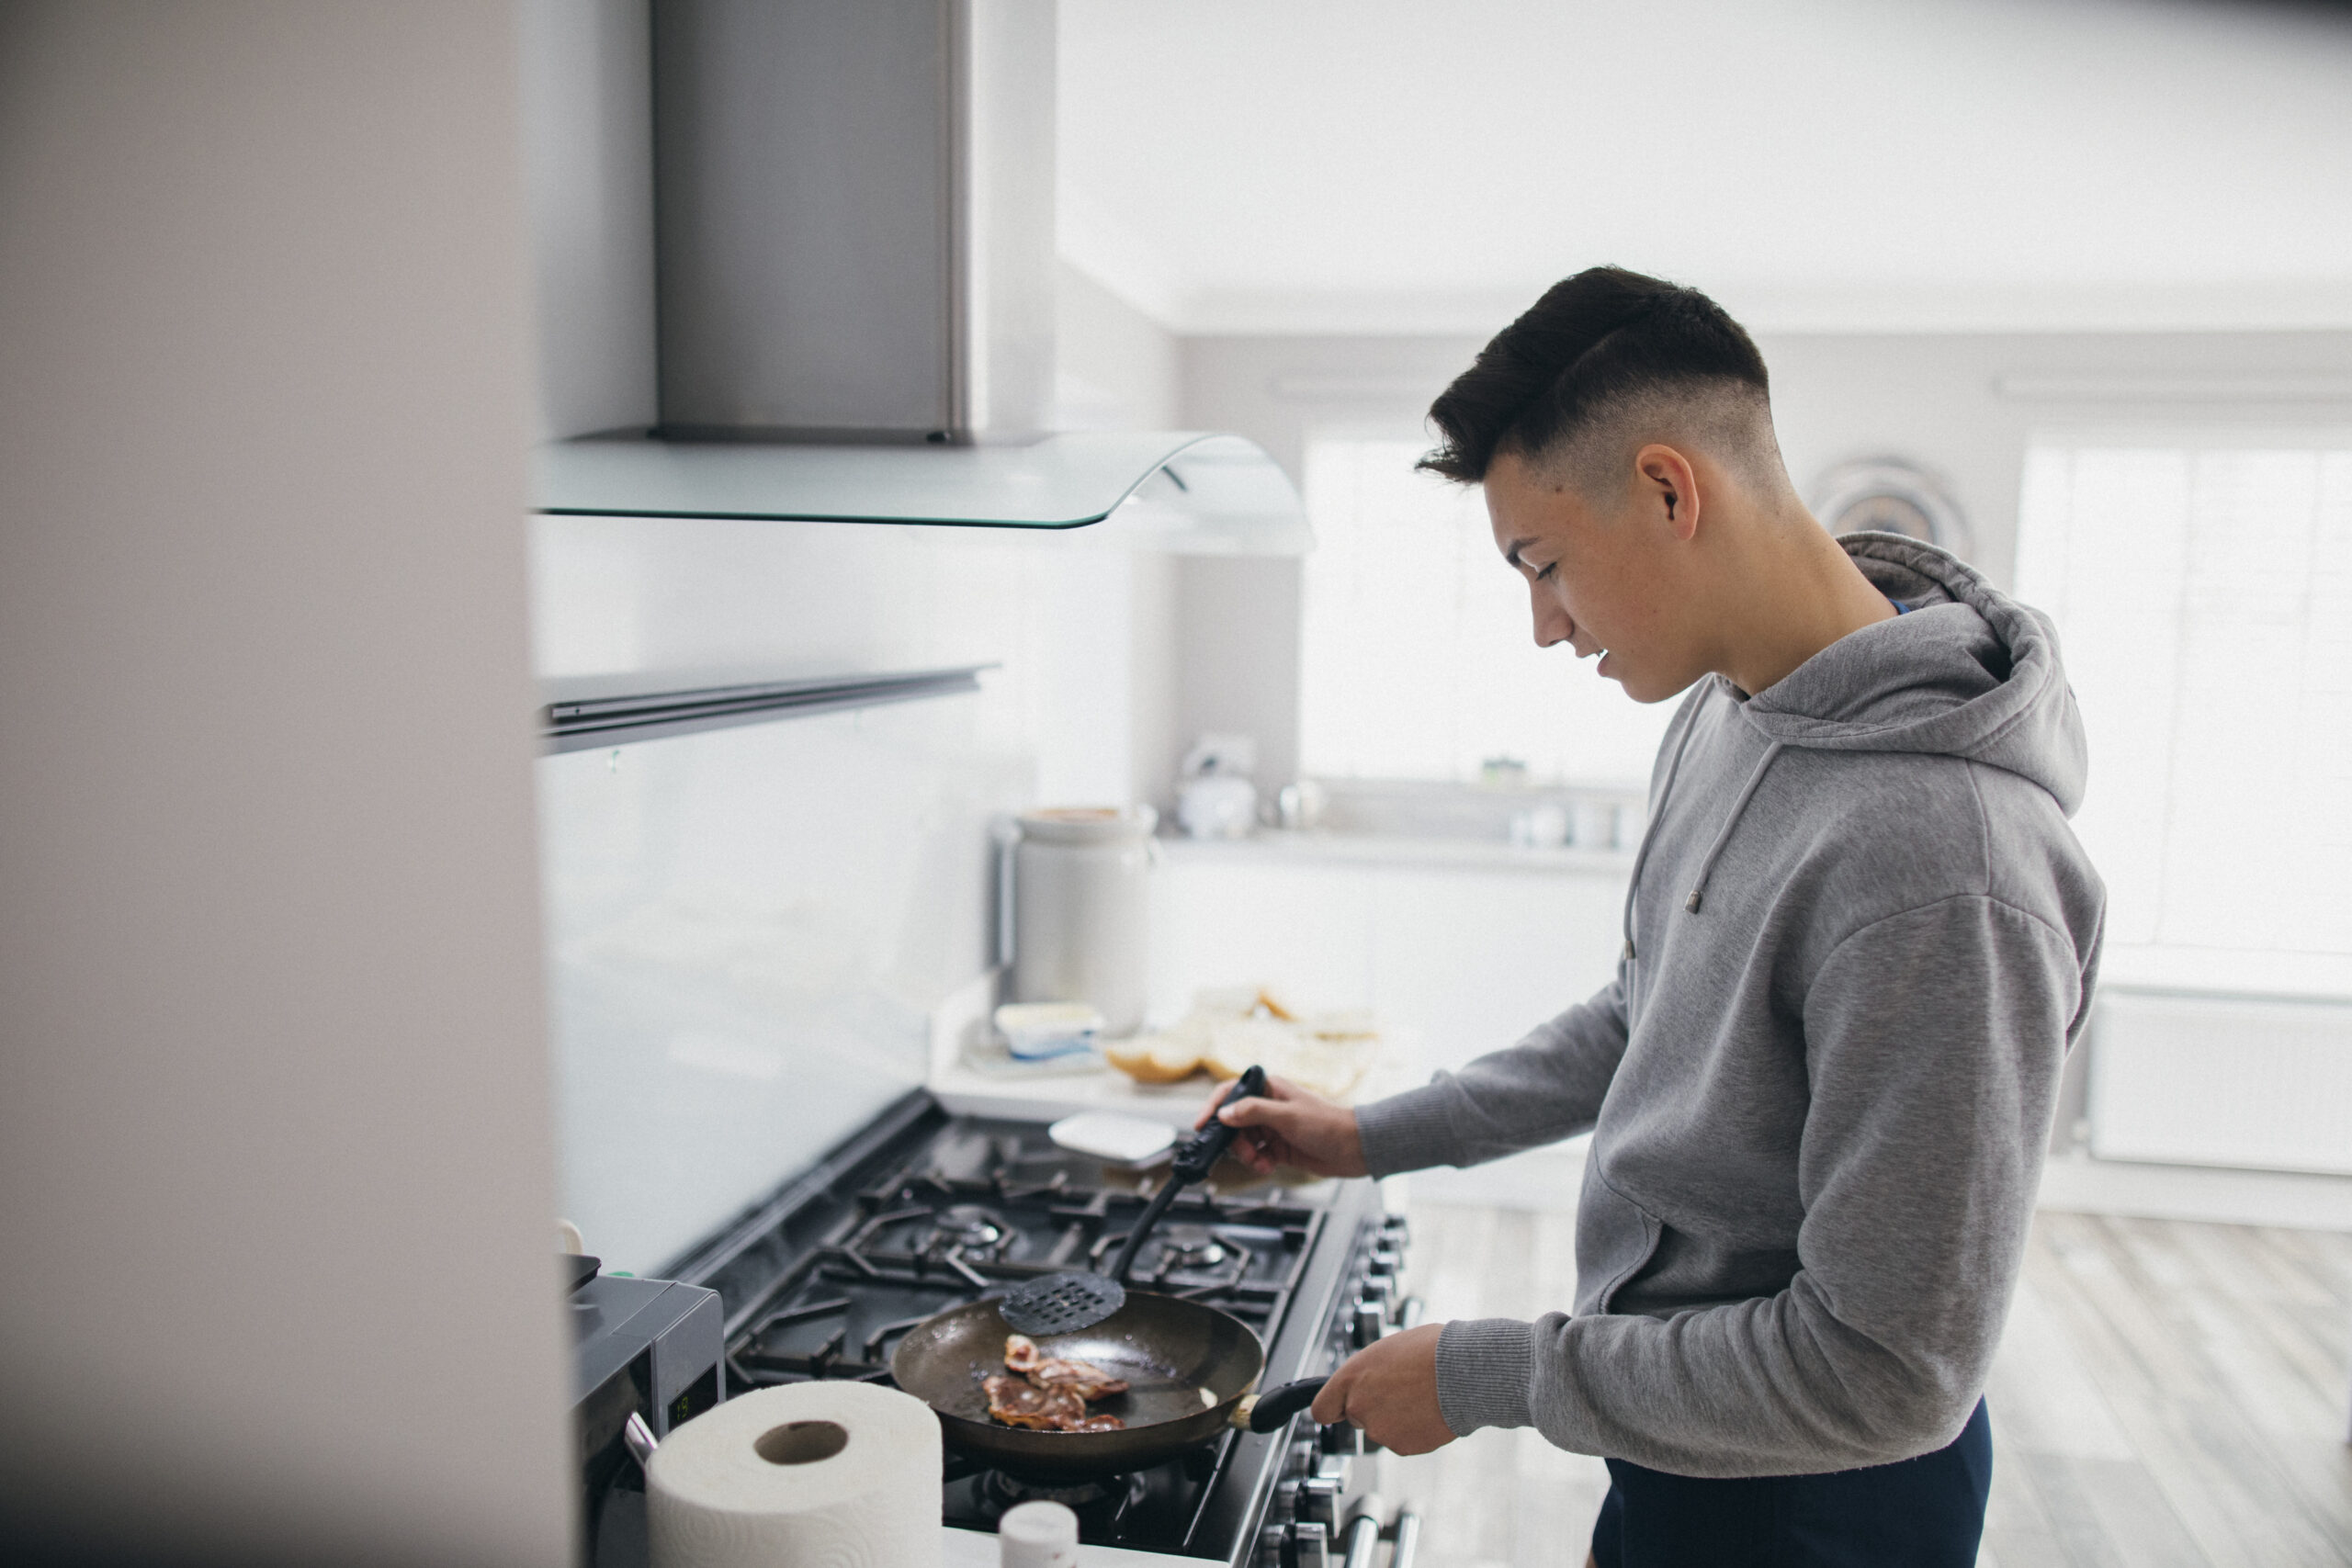 A person with short dark hair is cooking bacon in a frying pan on a stove in a modern kitchen. The individual is wearing a gray hoodie and is holding a spatula in their hand while standing in front of the stove. The countertop has a roll of paper towels.